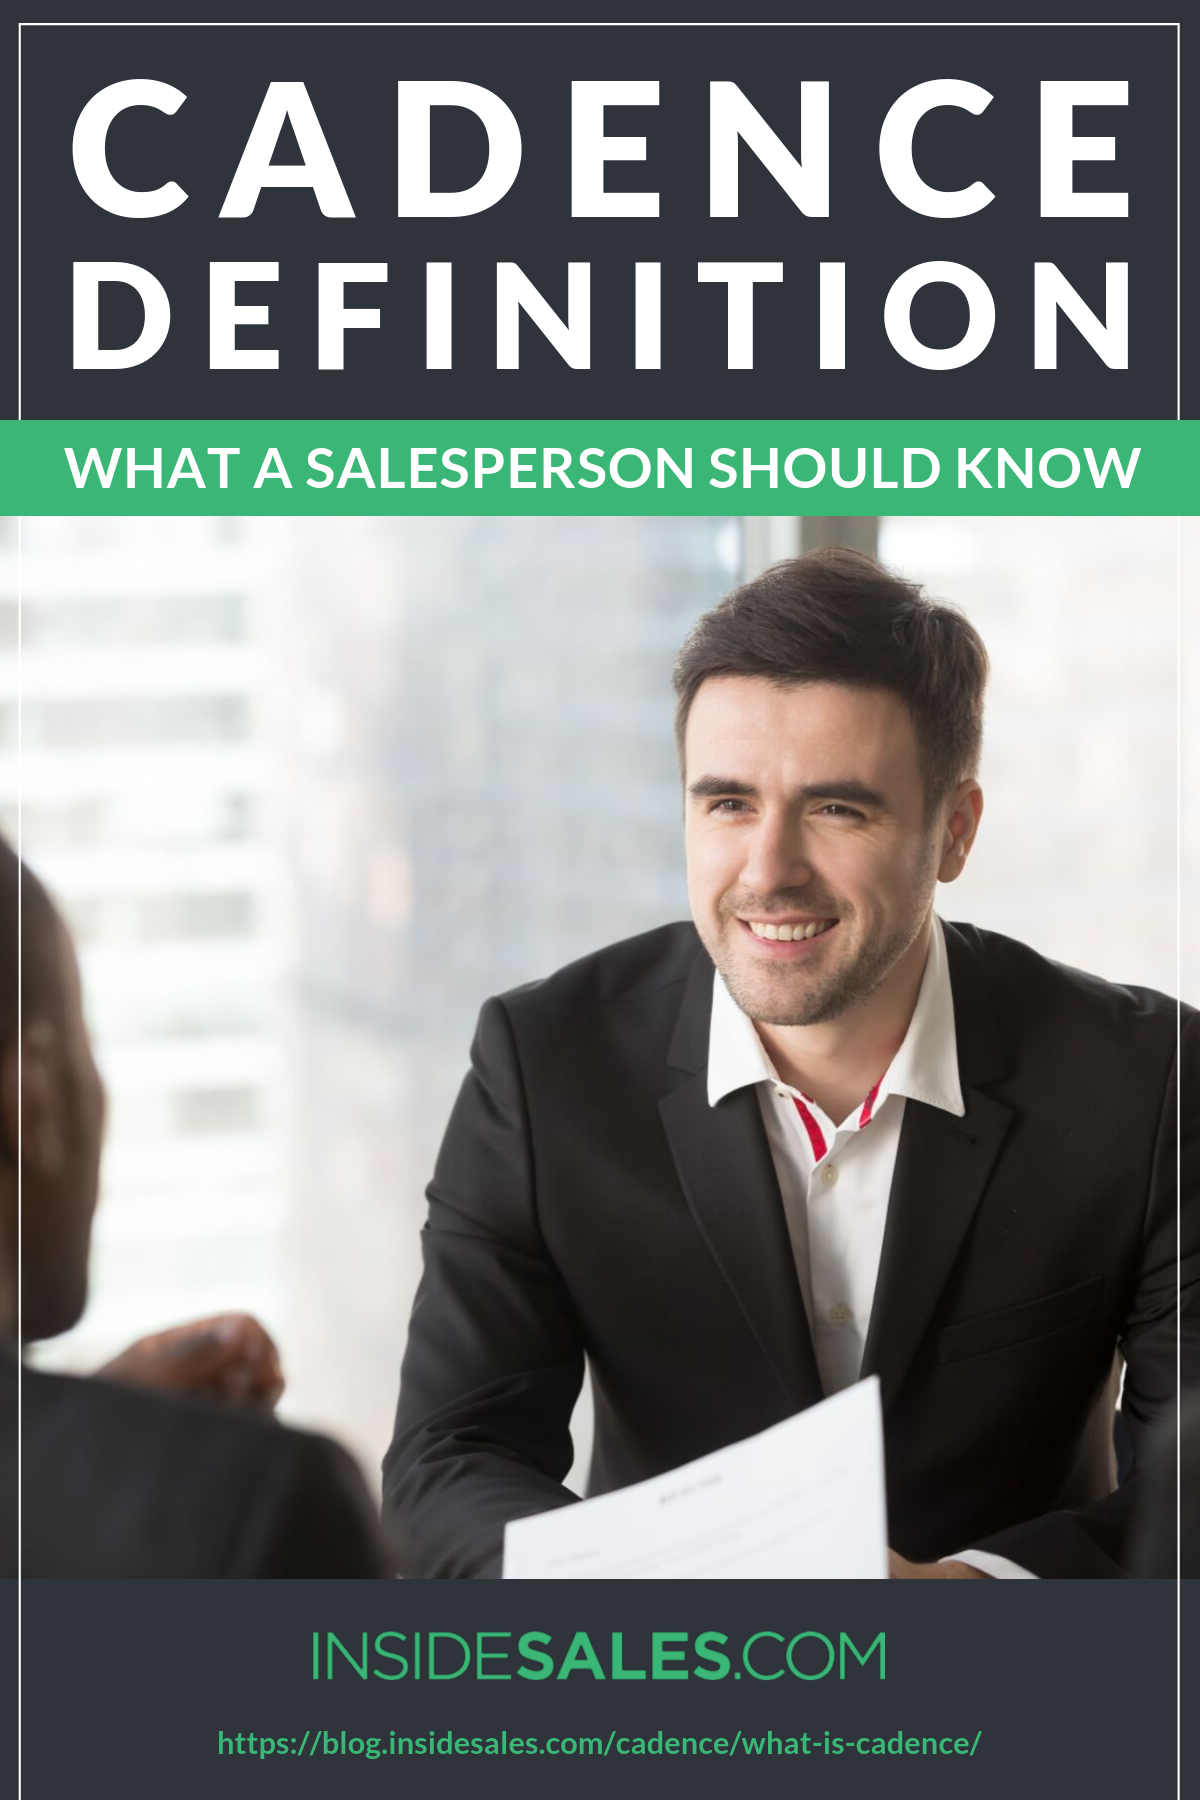 Cadence Definition: What A Salesperson Should Know https://www.insidesales.com/blog/cadence/what-is-cadence/